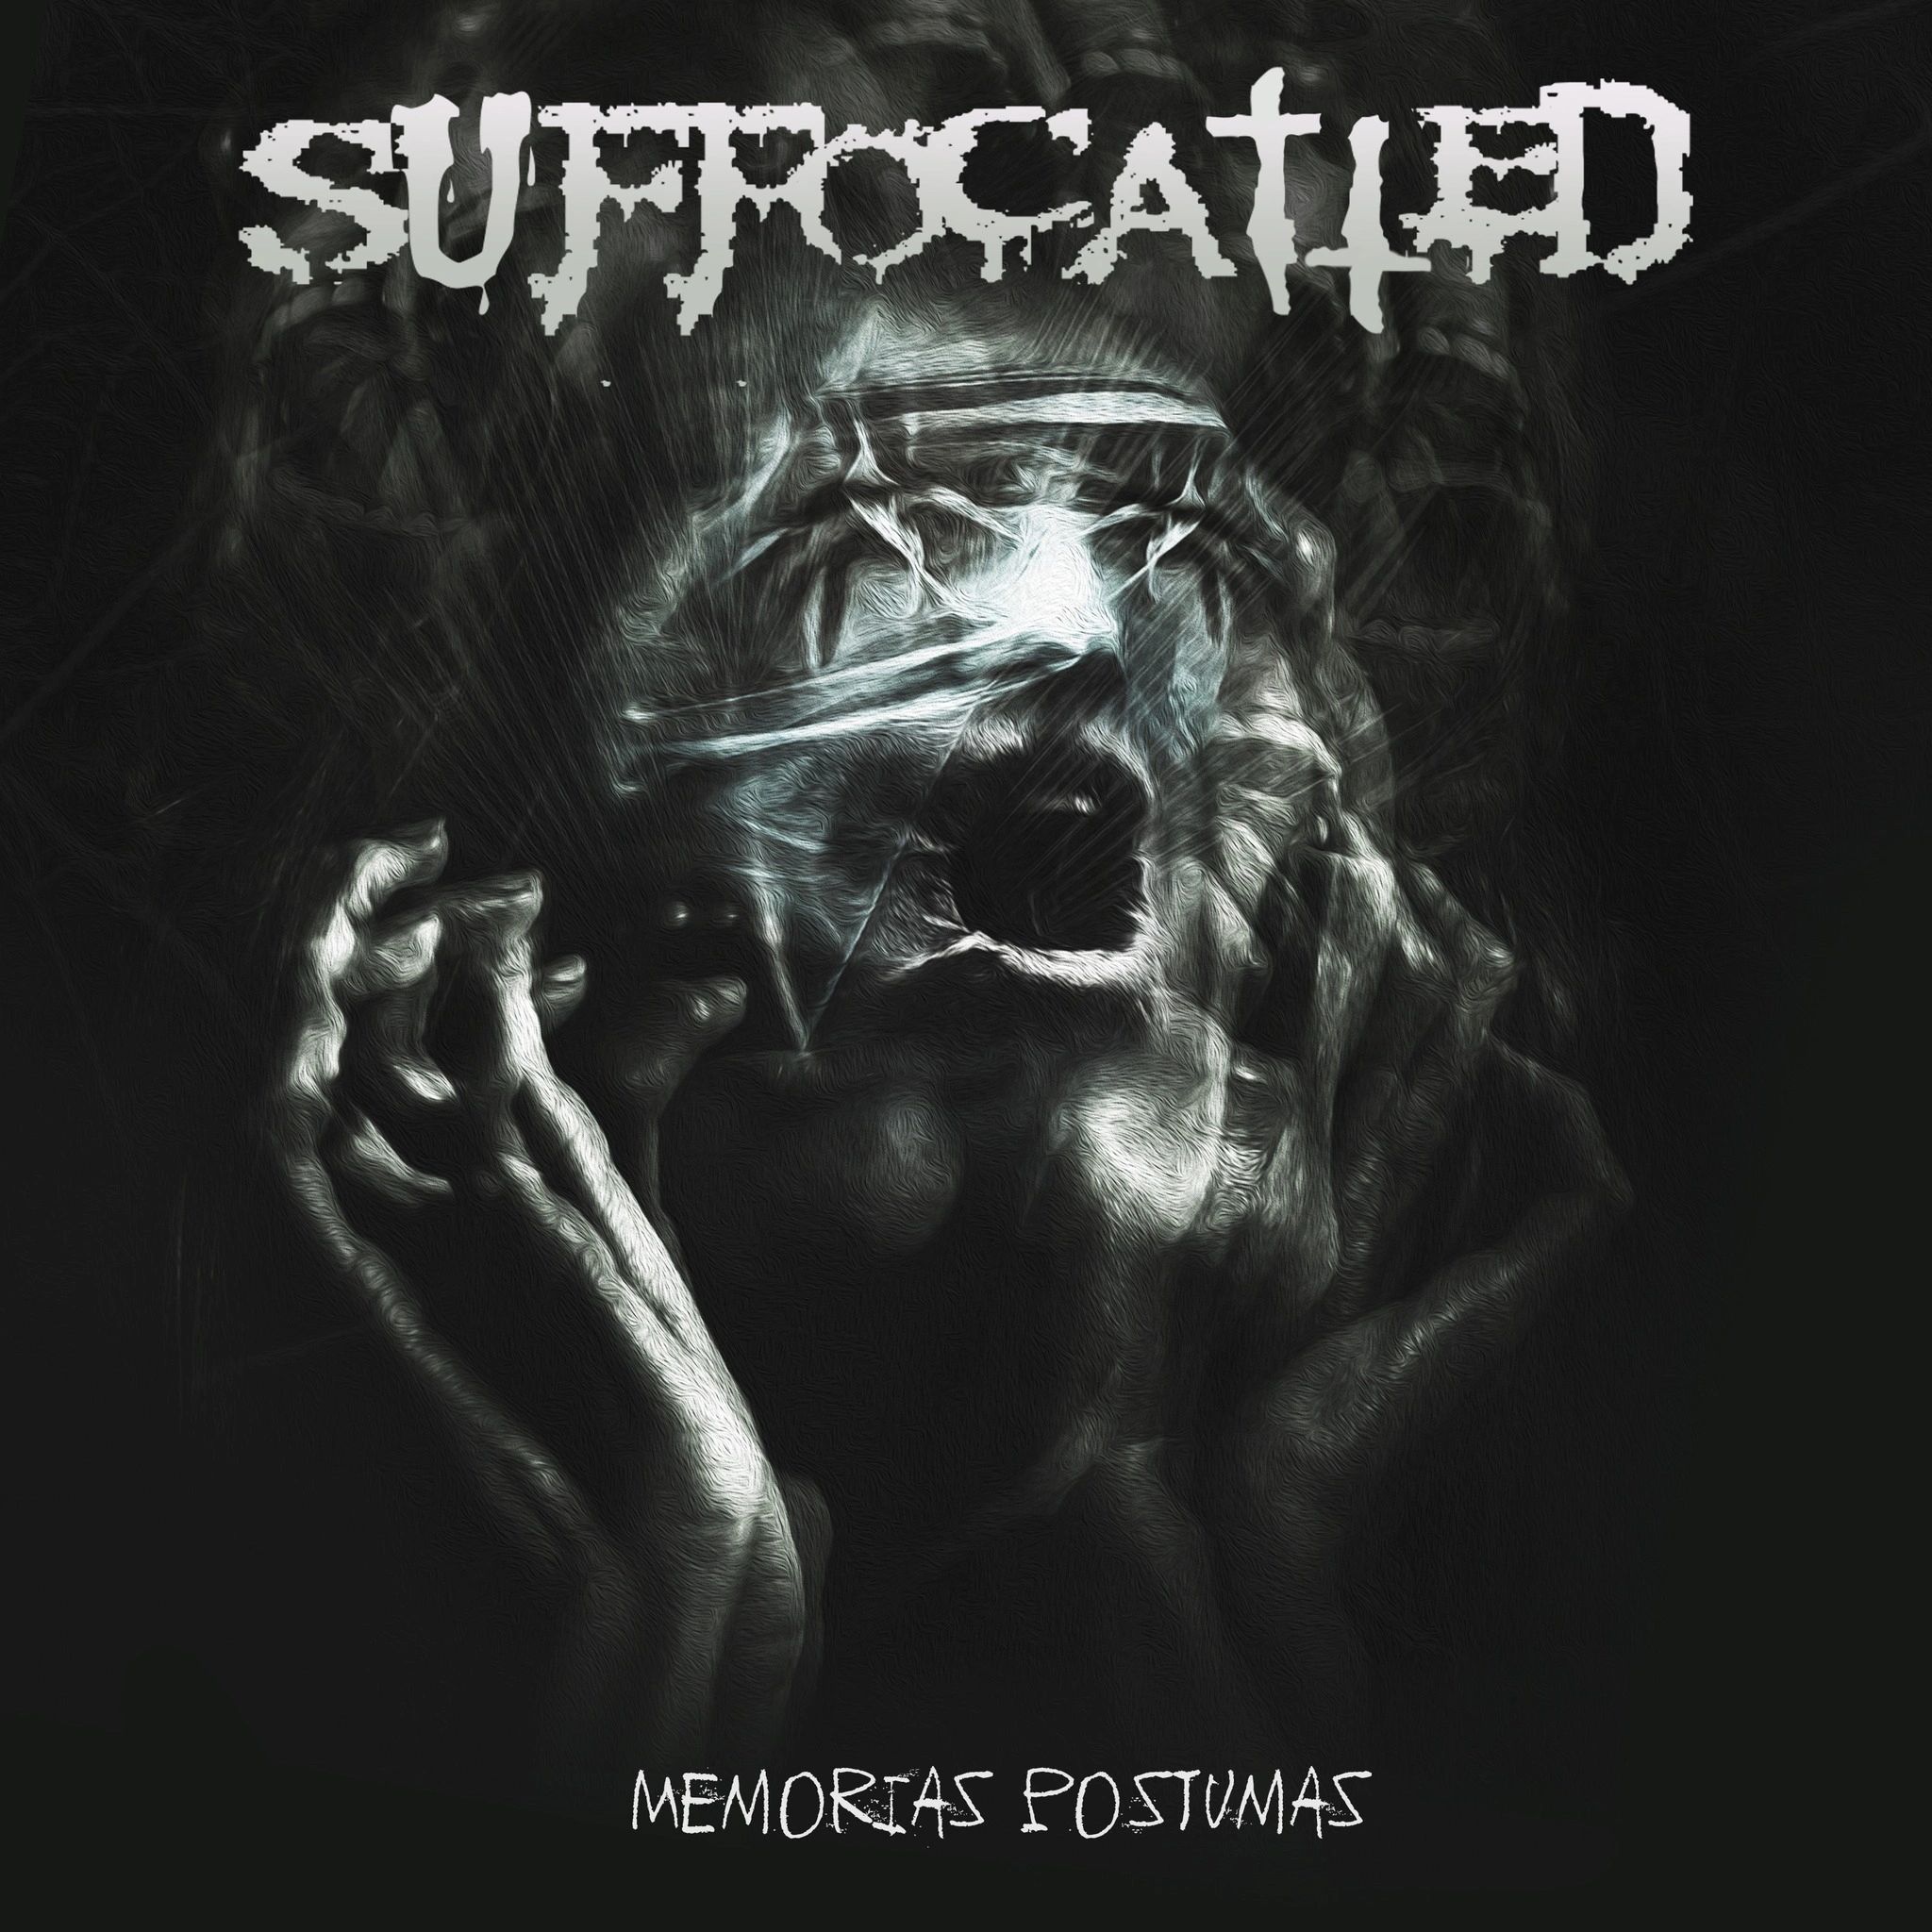 Suffocatted